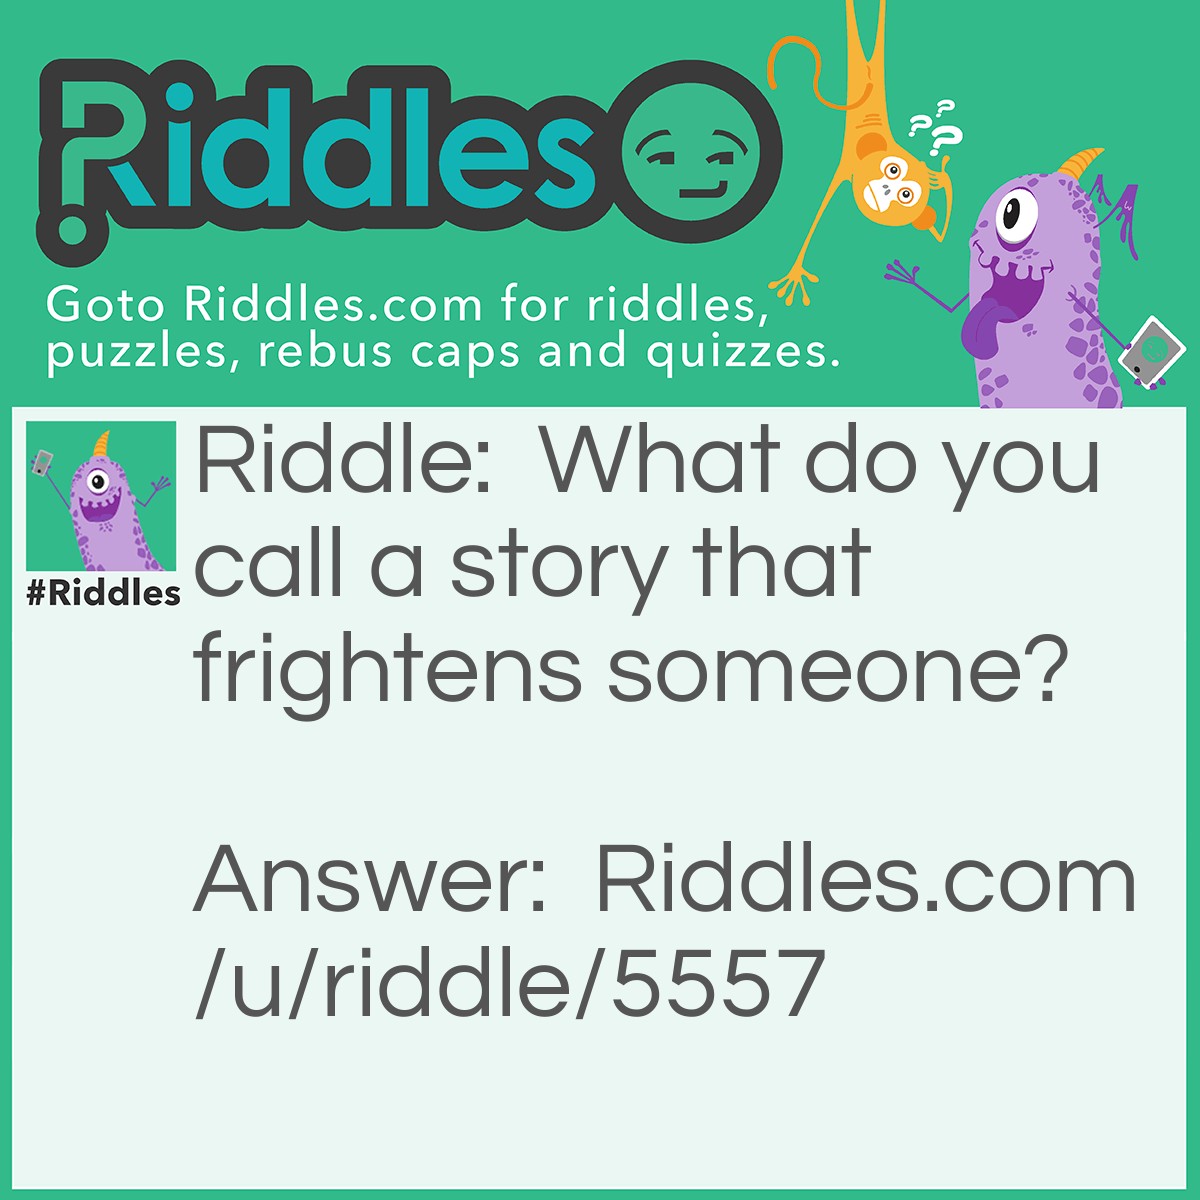 Riddle: What do you call a story that frightens someone? Answer: A GHOST story.